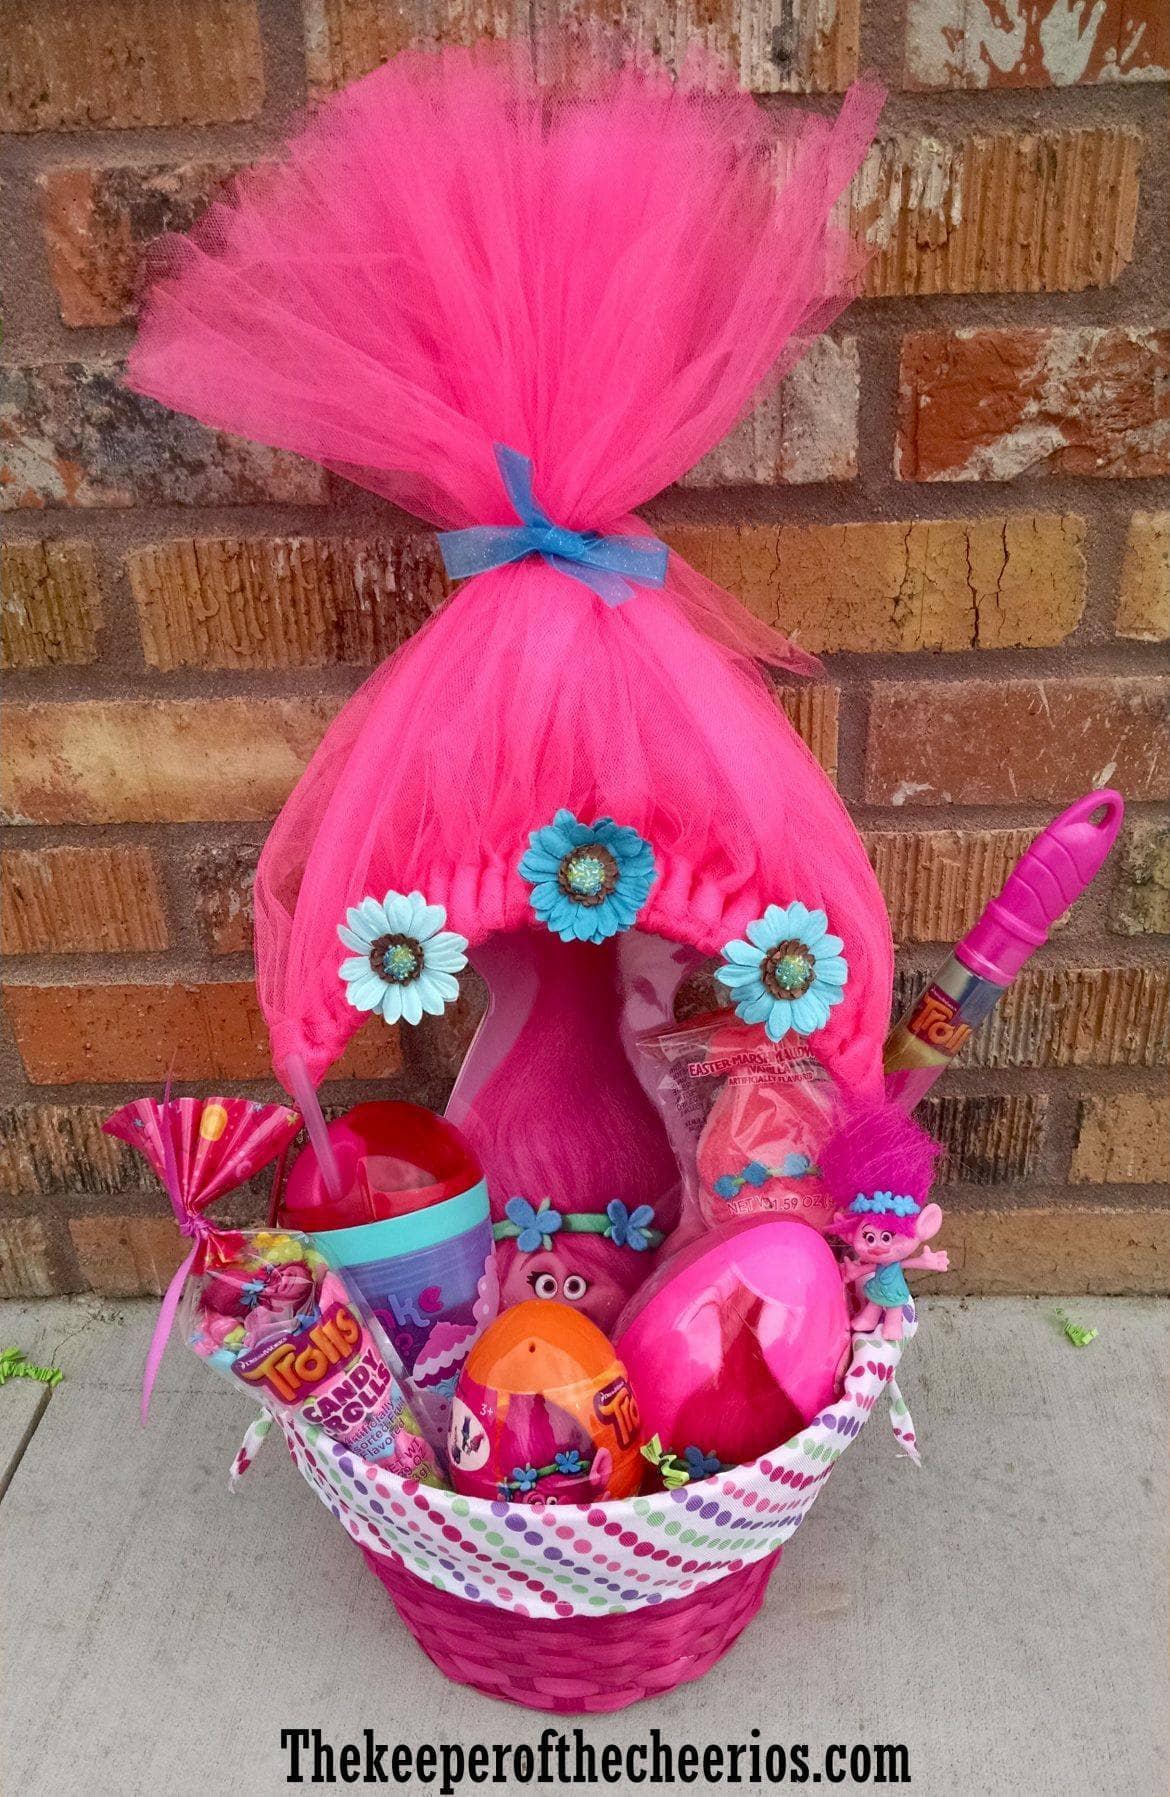 Trolls Themed Easter Basket...these are the BEST Easter Basket Ideas!